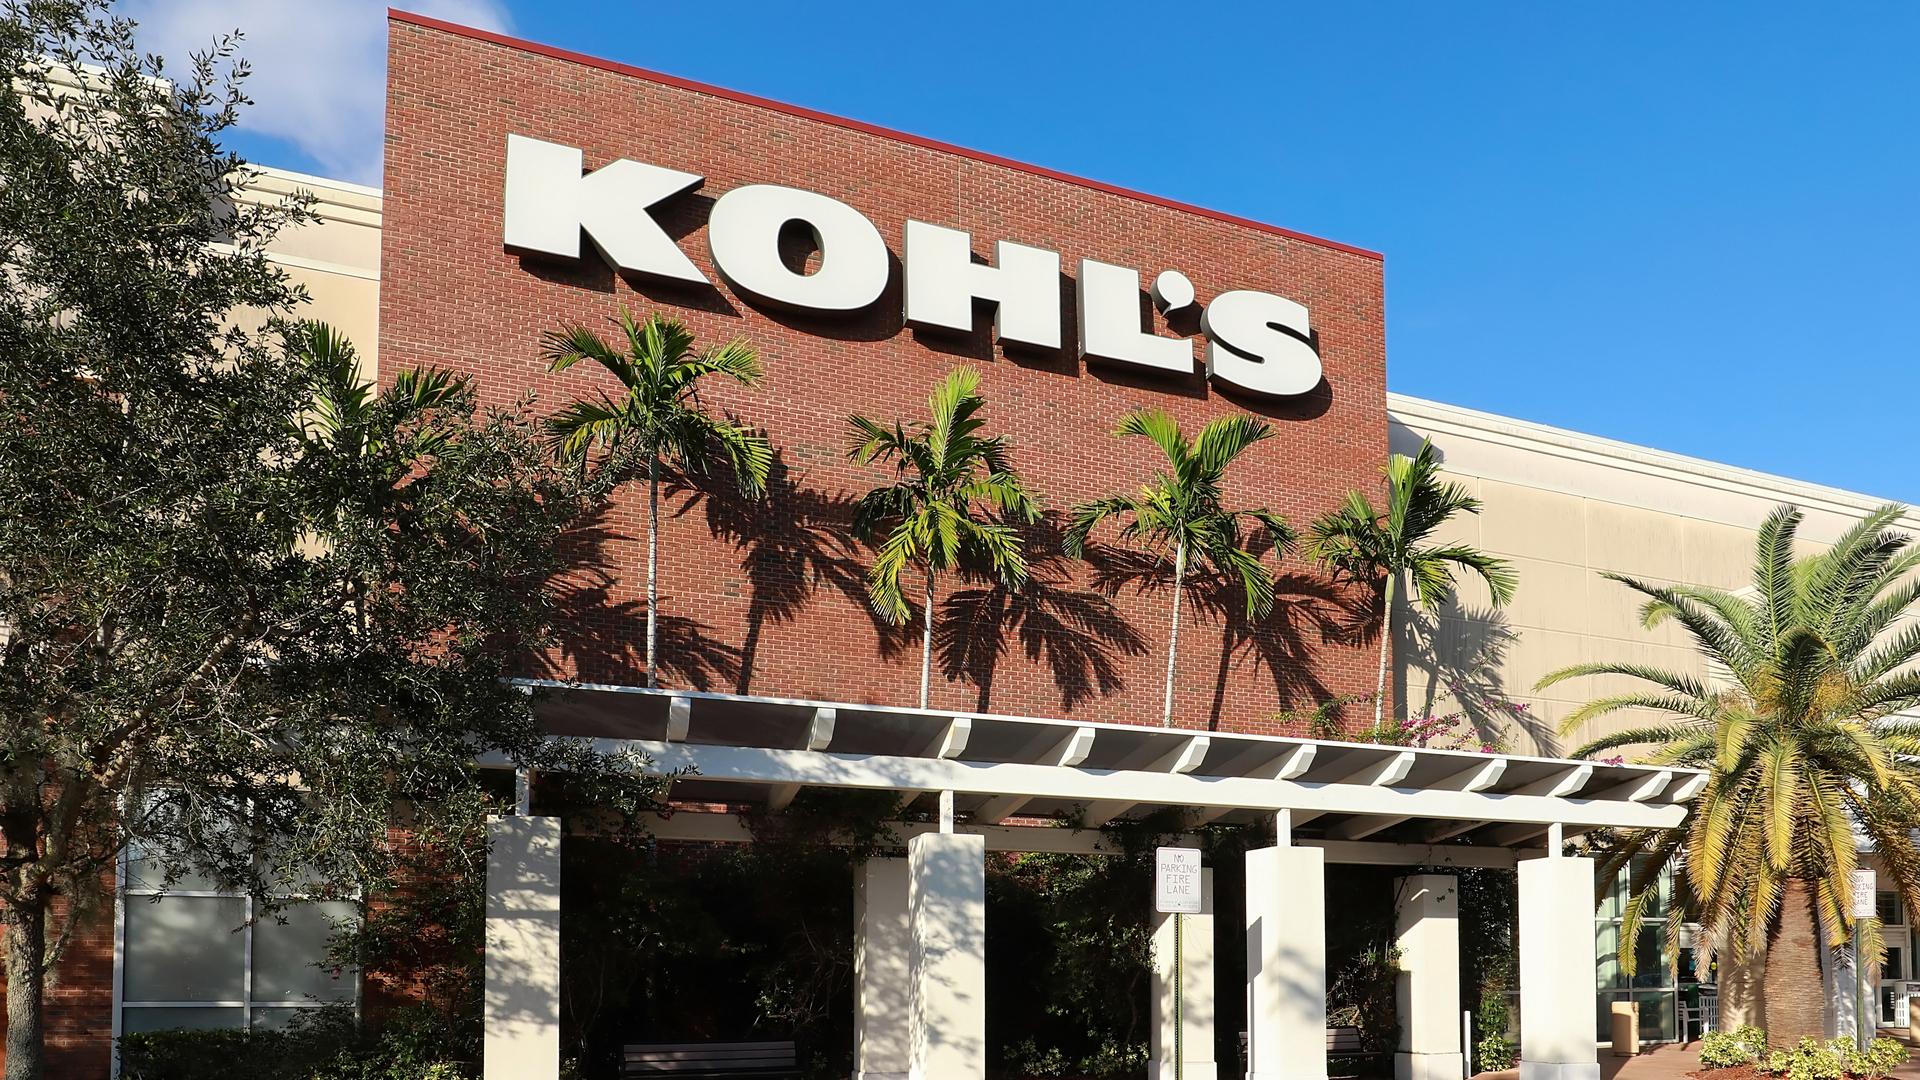 3 Kohl’s Brand Products To Avoid Buying